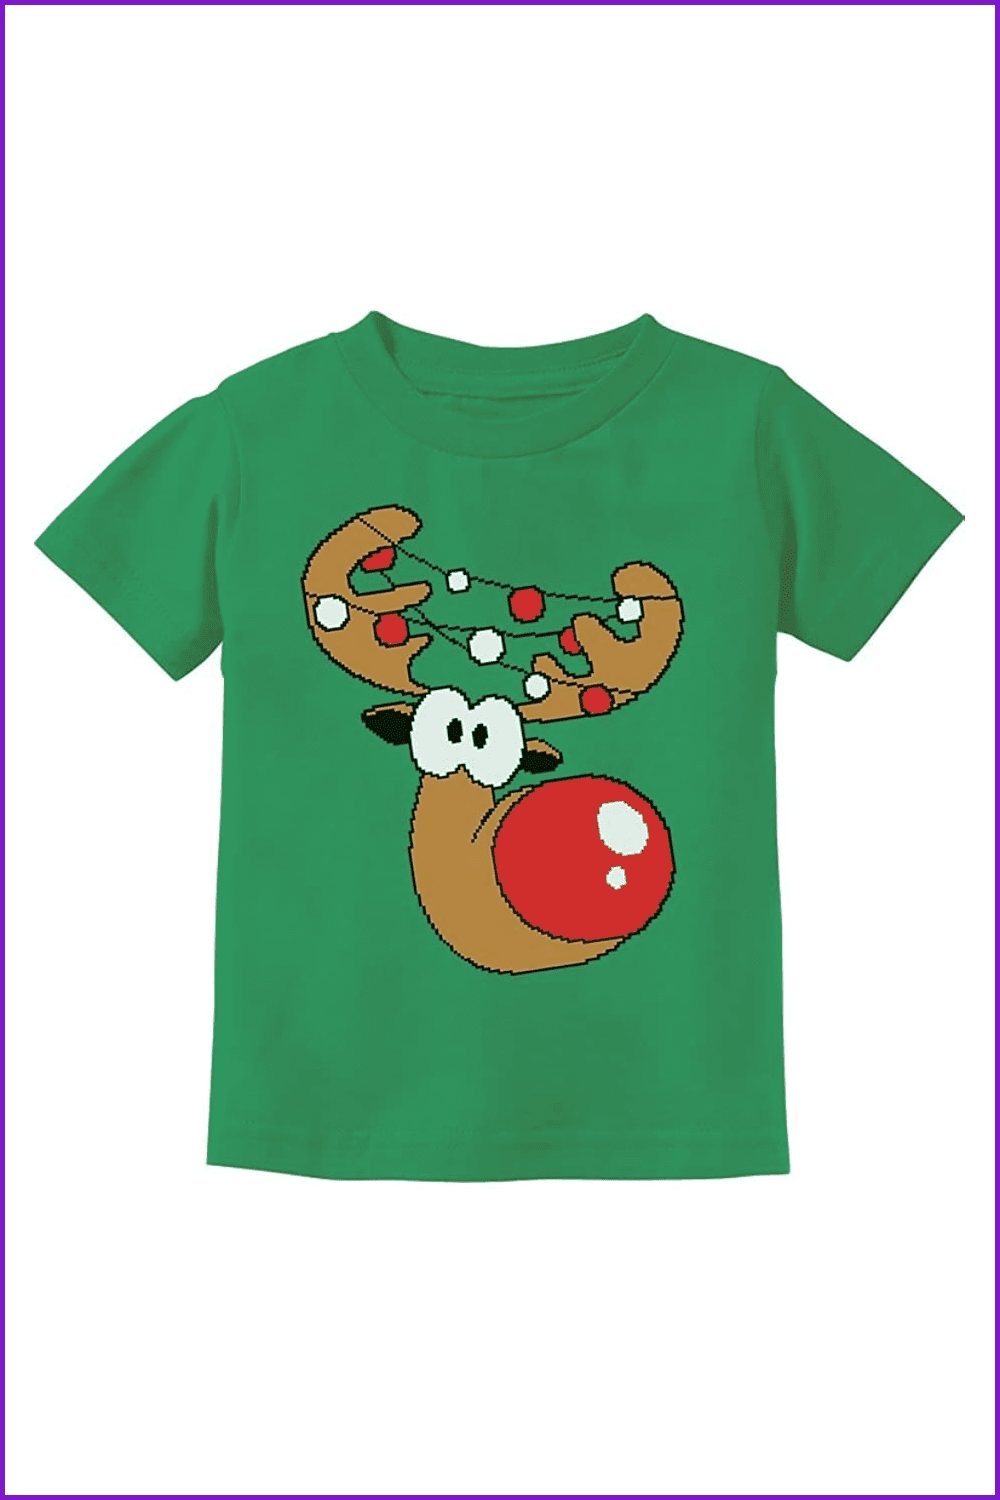 Green t-shirt with The deer with a big red nose has lights in its horns.